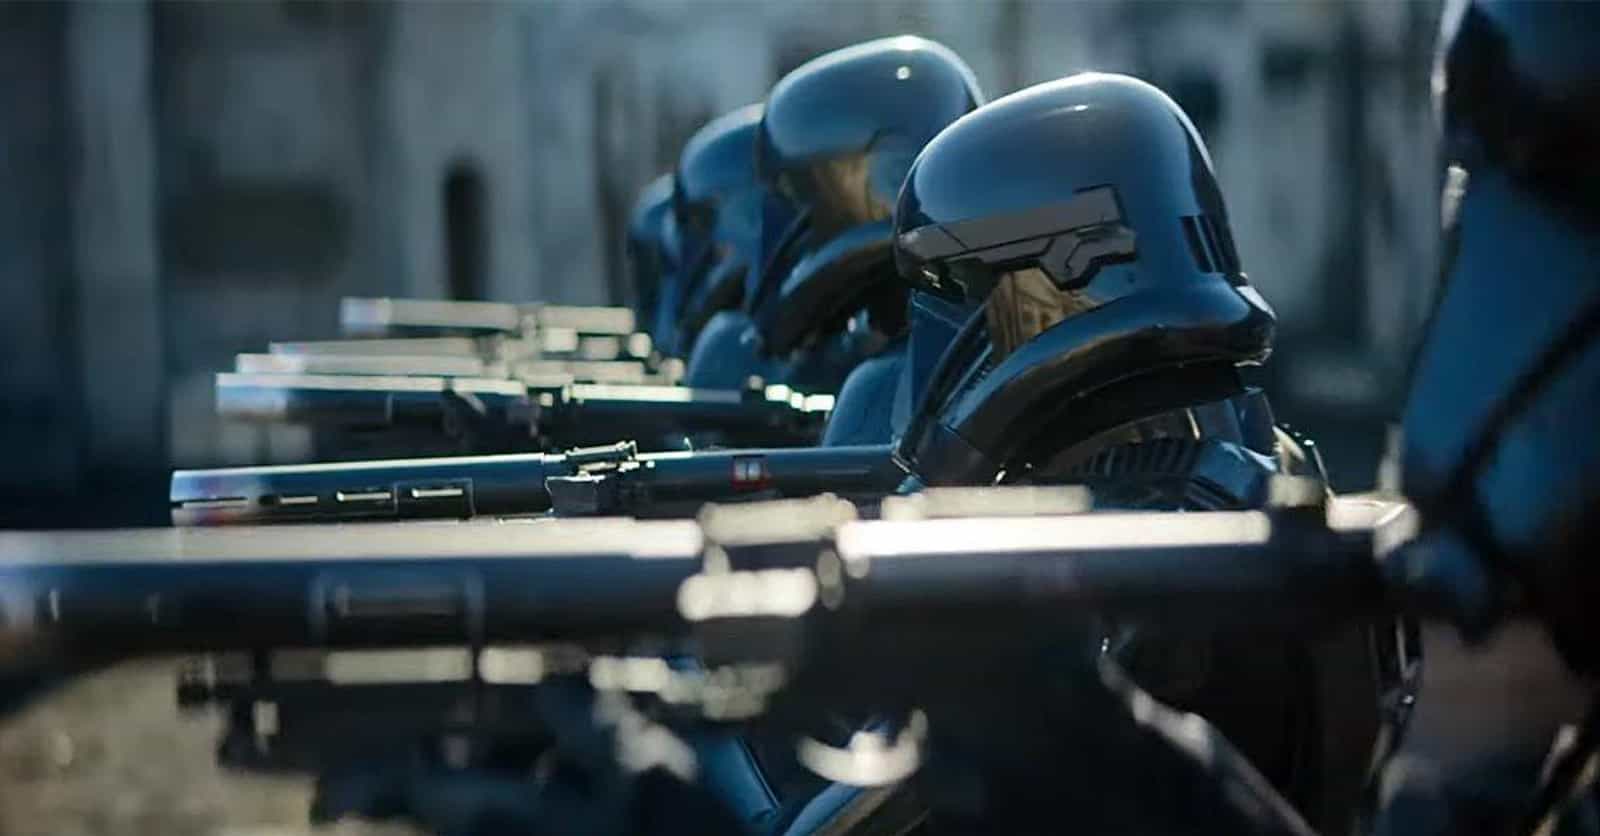 Small But Interesting Details From 'The Mandalorian'